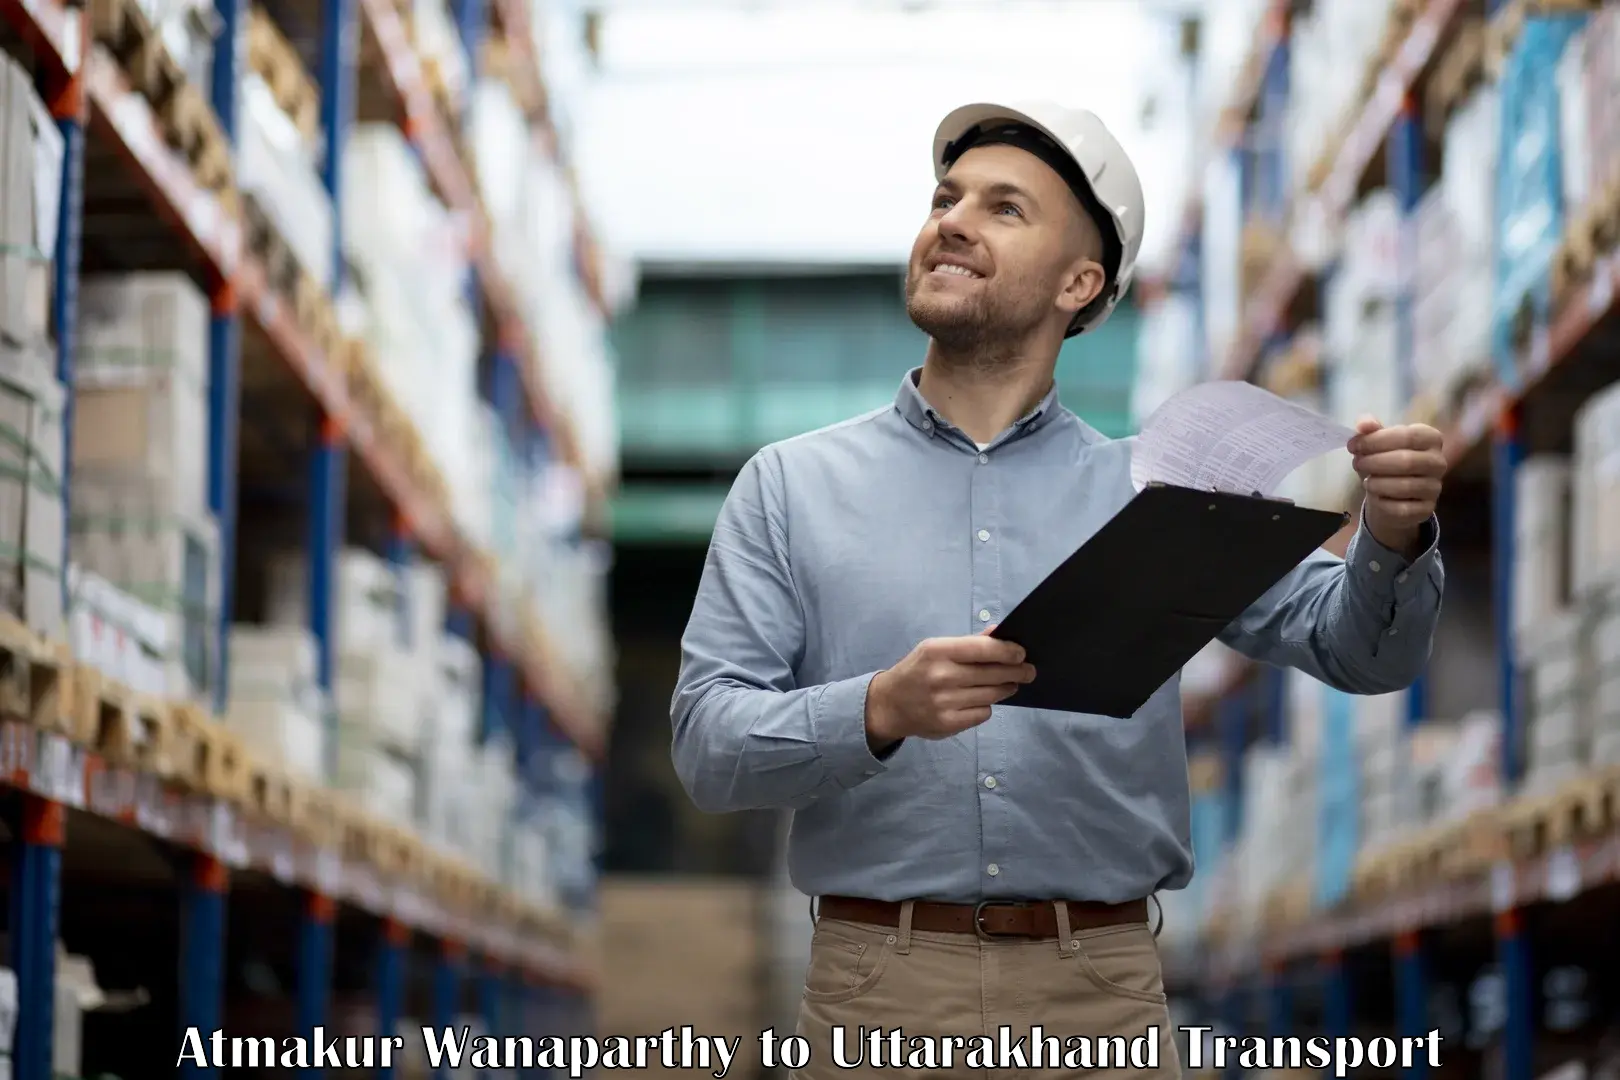 Truck transport companies in India Atmakur Wanaparthy to Haridwar